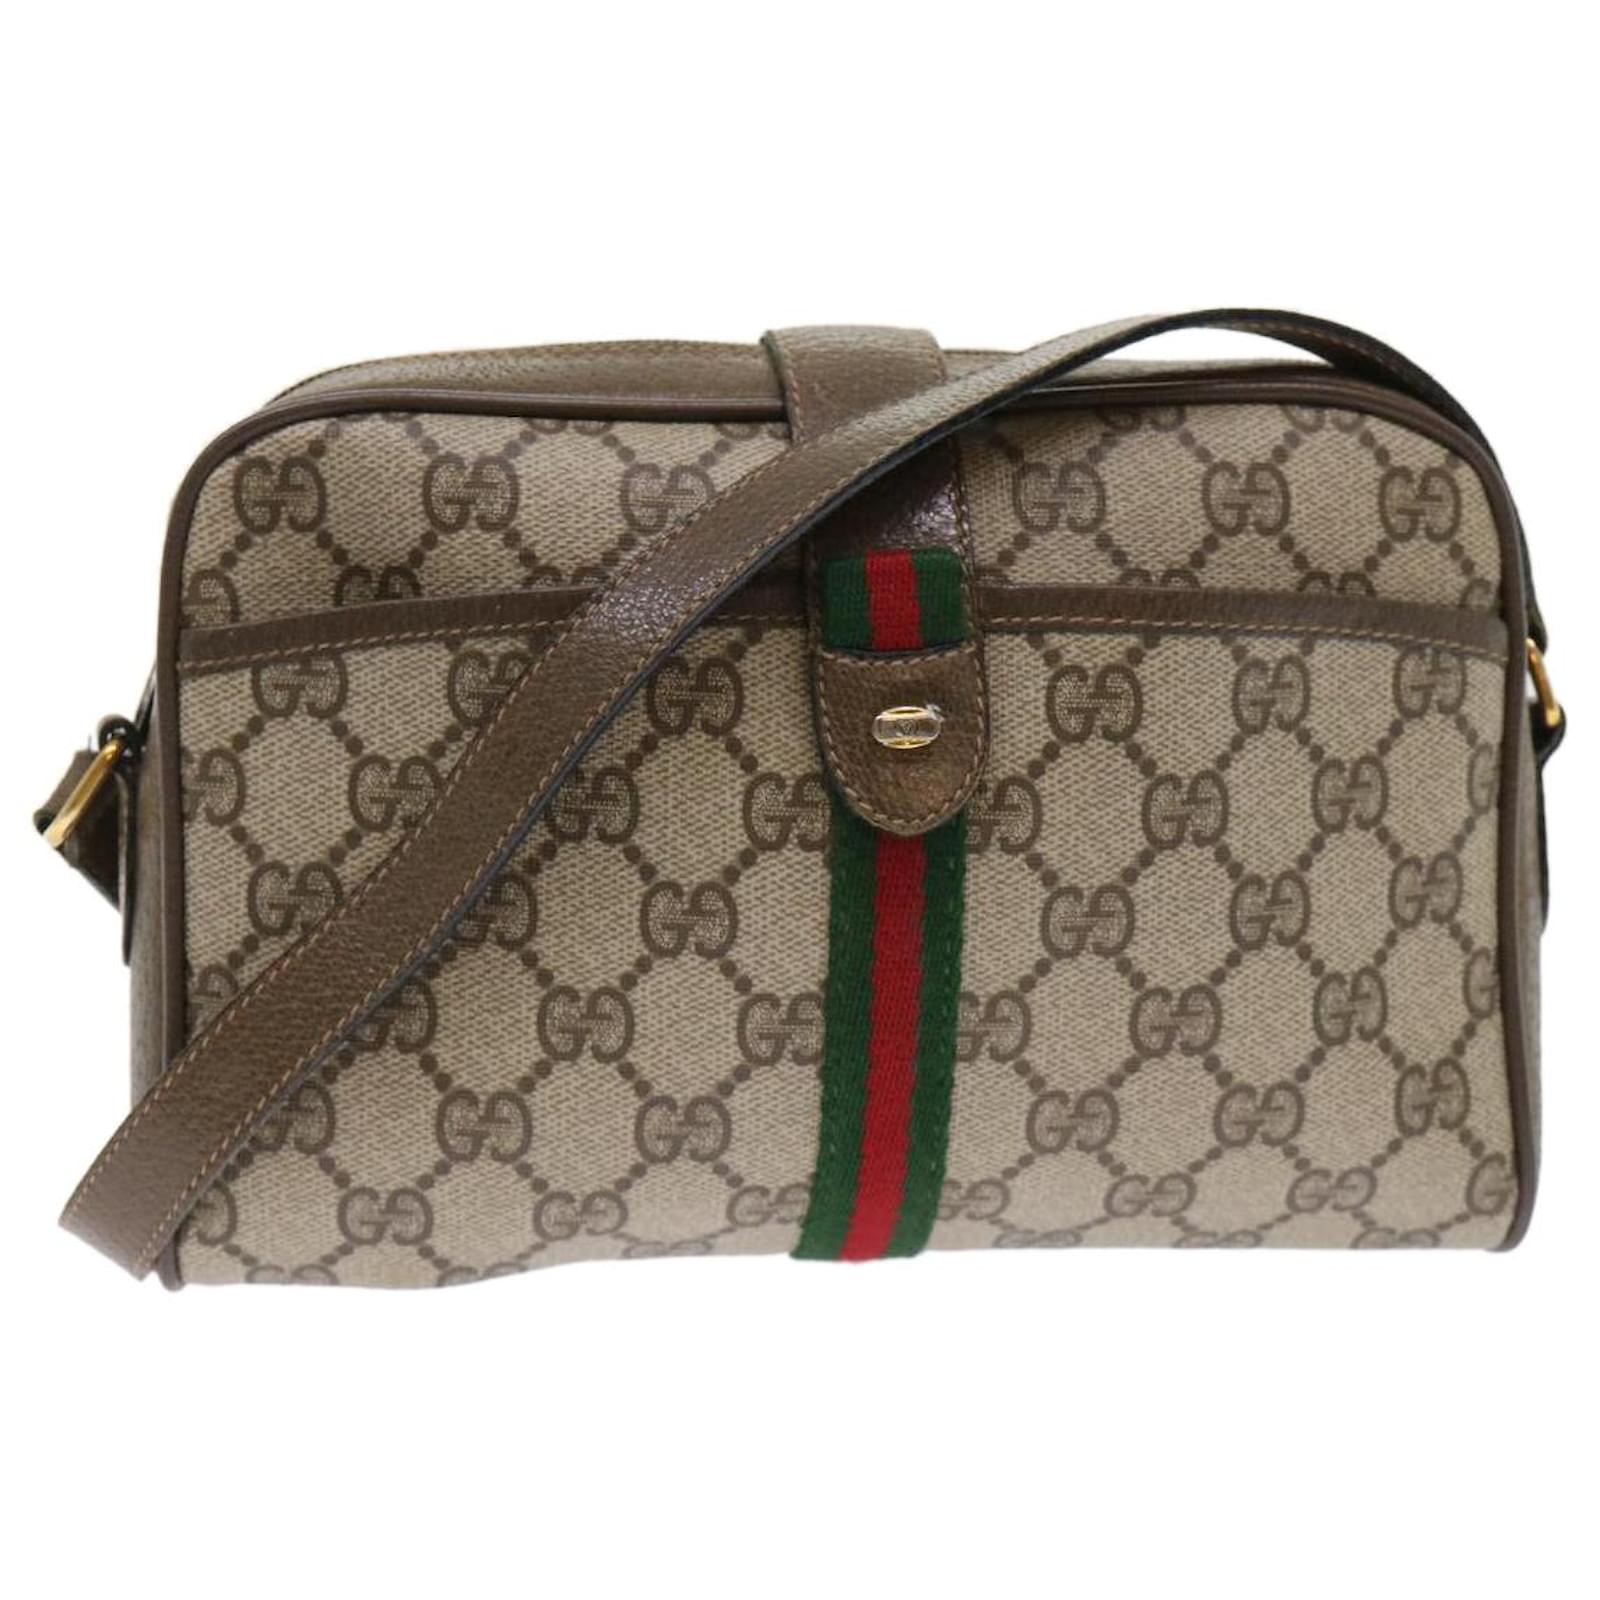 Authentic gucci sherry line crossbody shoulder GG canvas beige